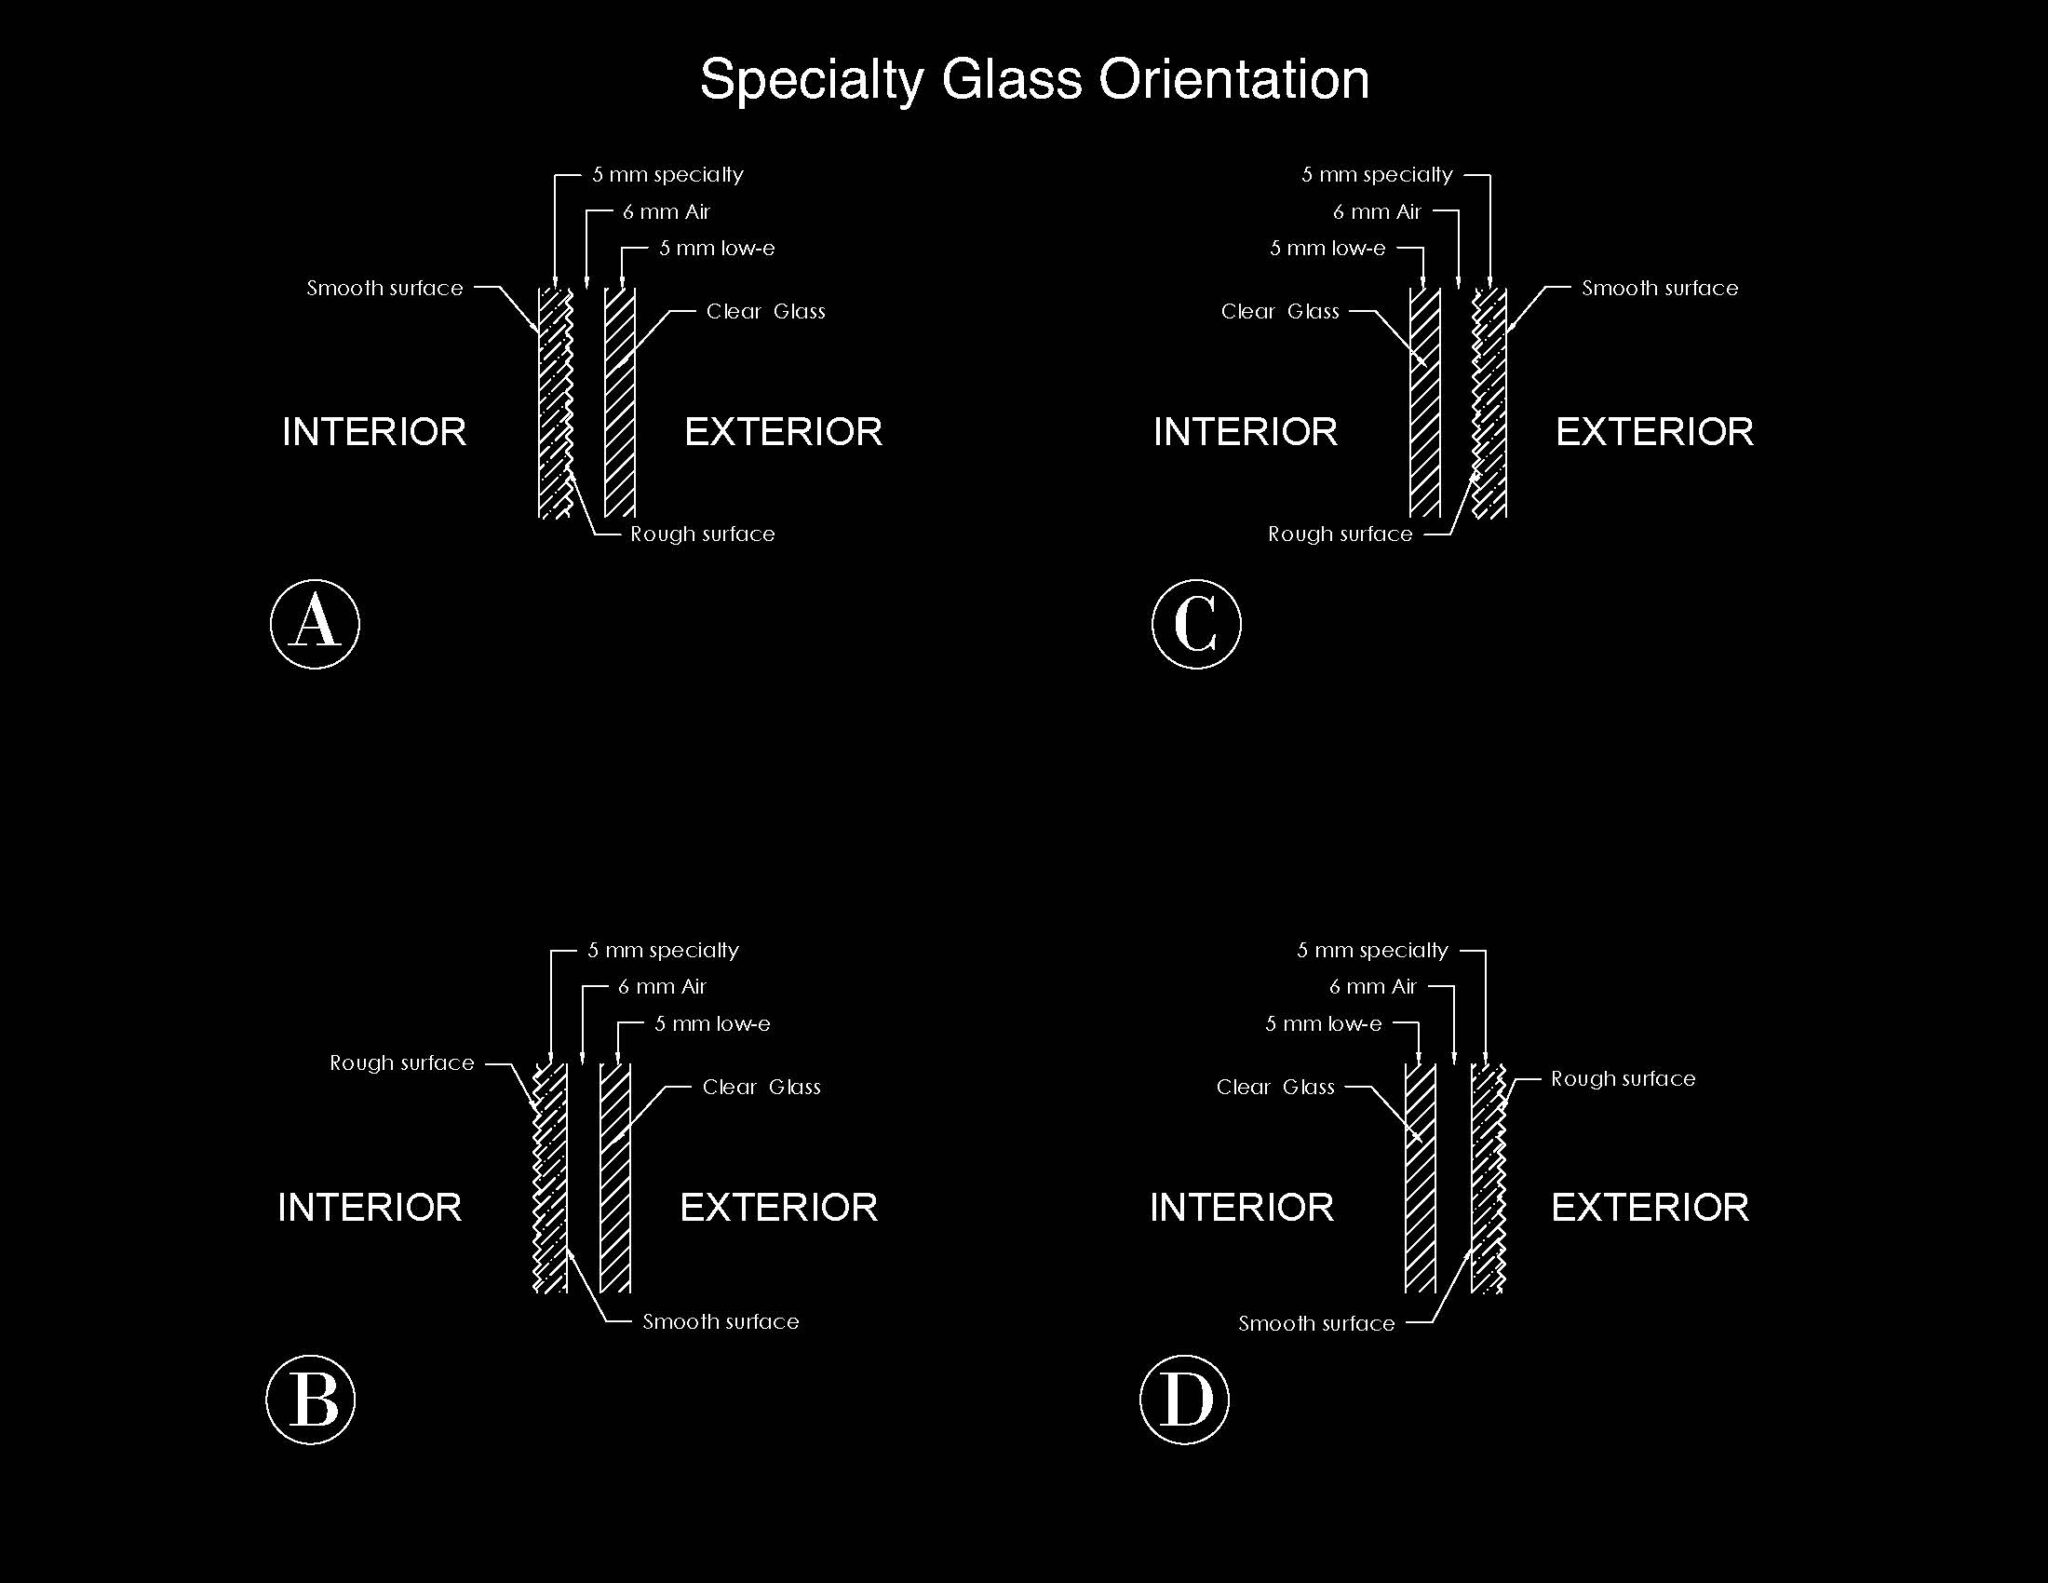 Specialty glass orientation[48]_Page_2